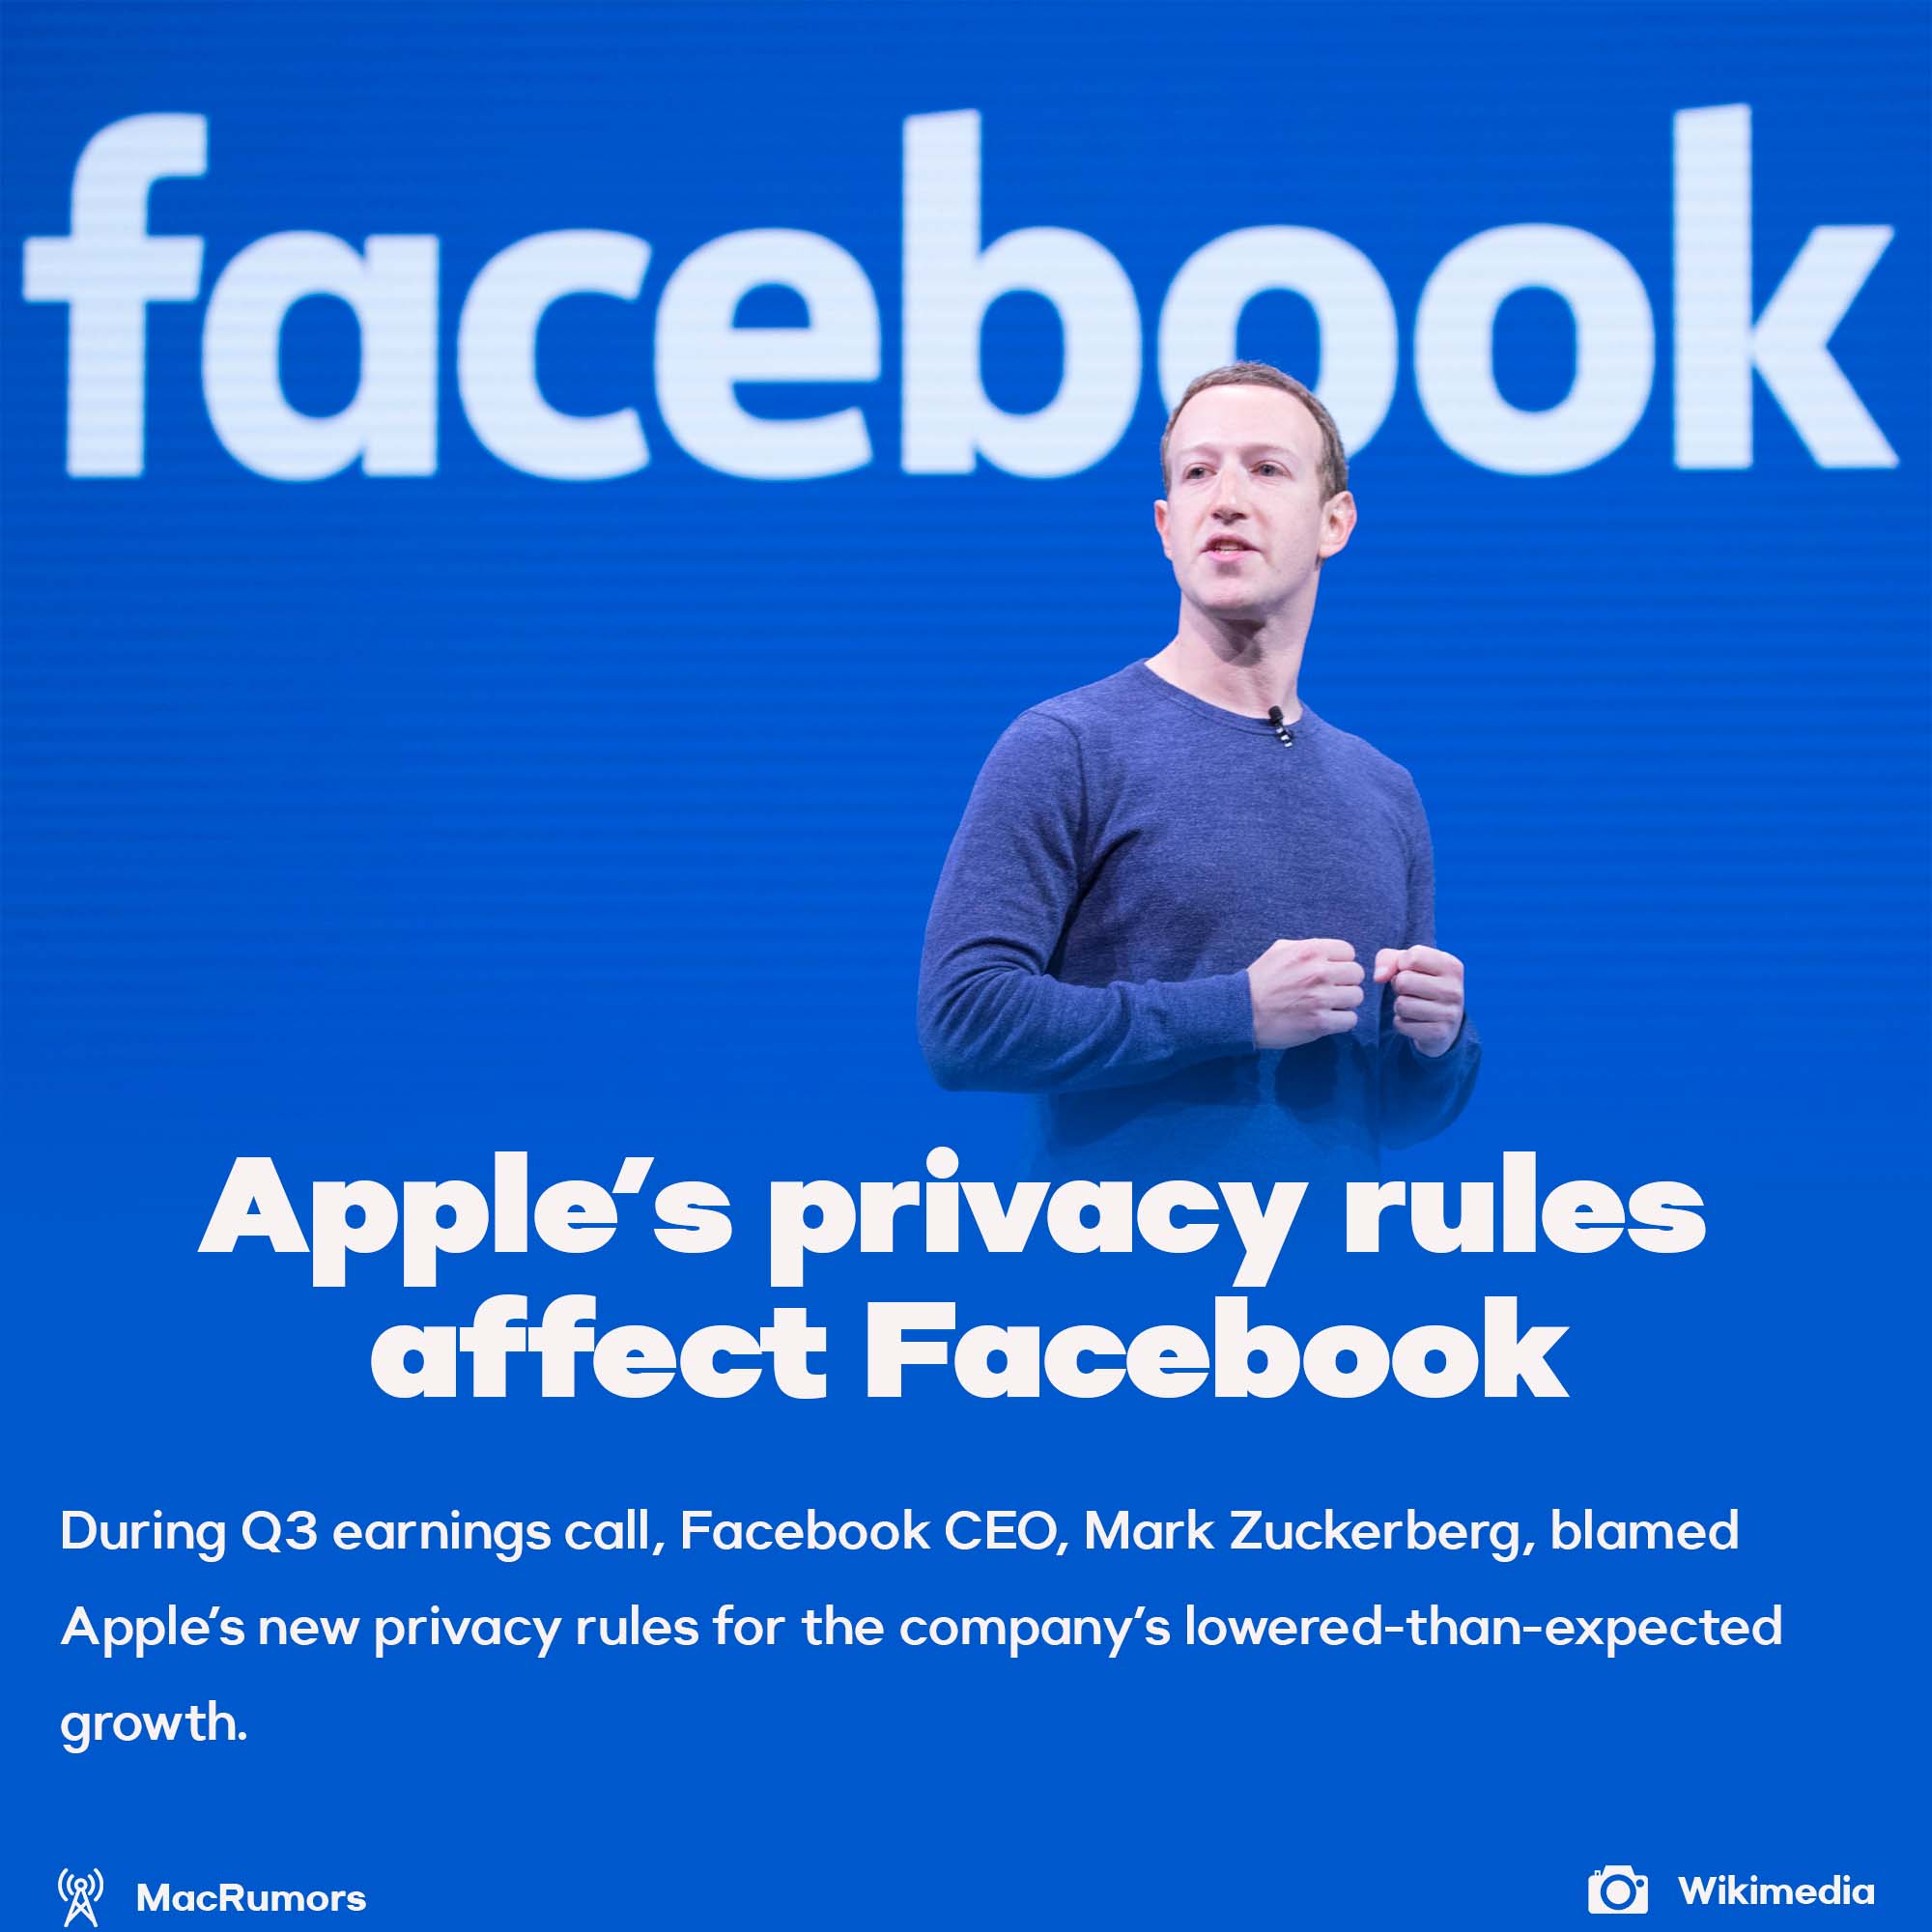 Mark Zuckerberg blames Apple's privacy policy for lower than expected earnings